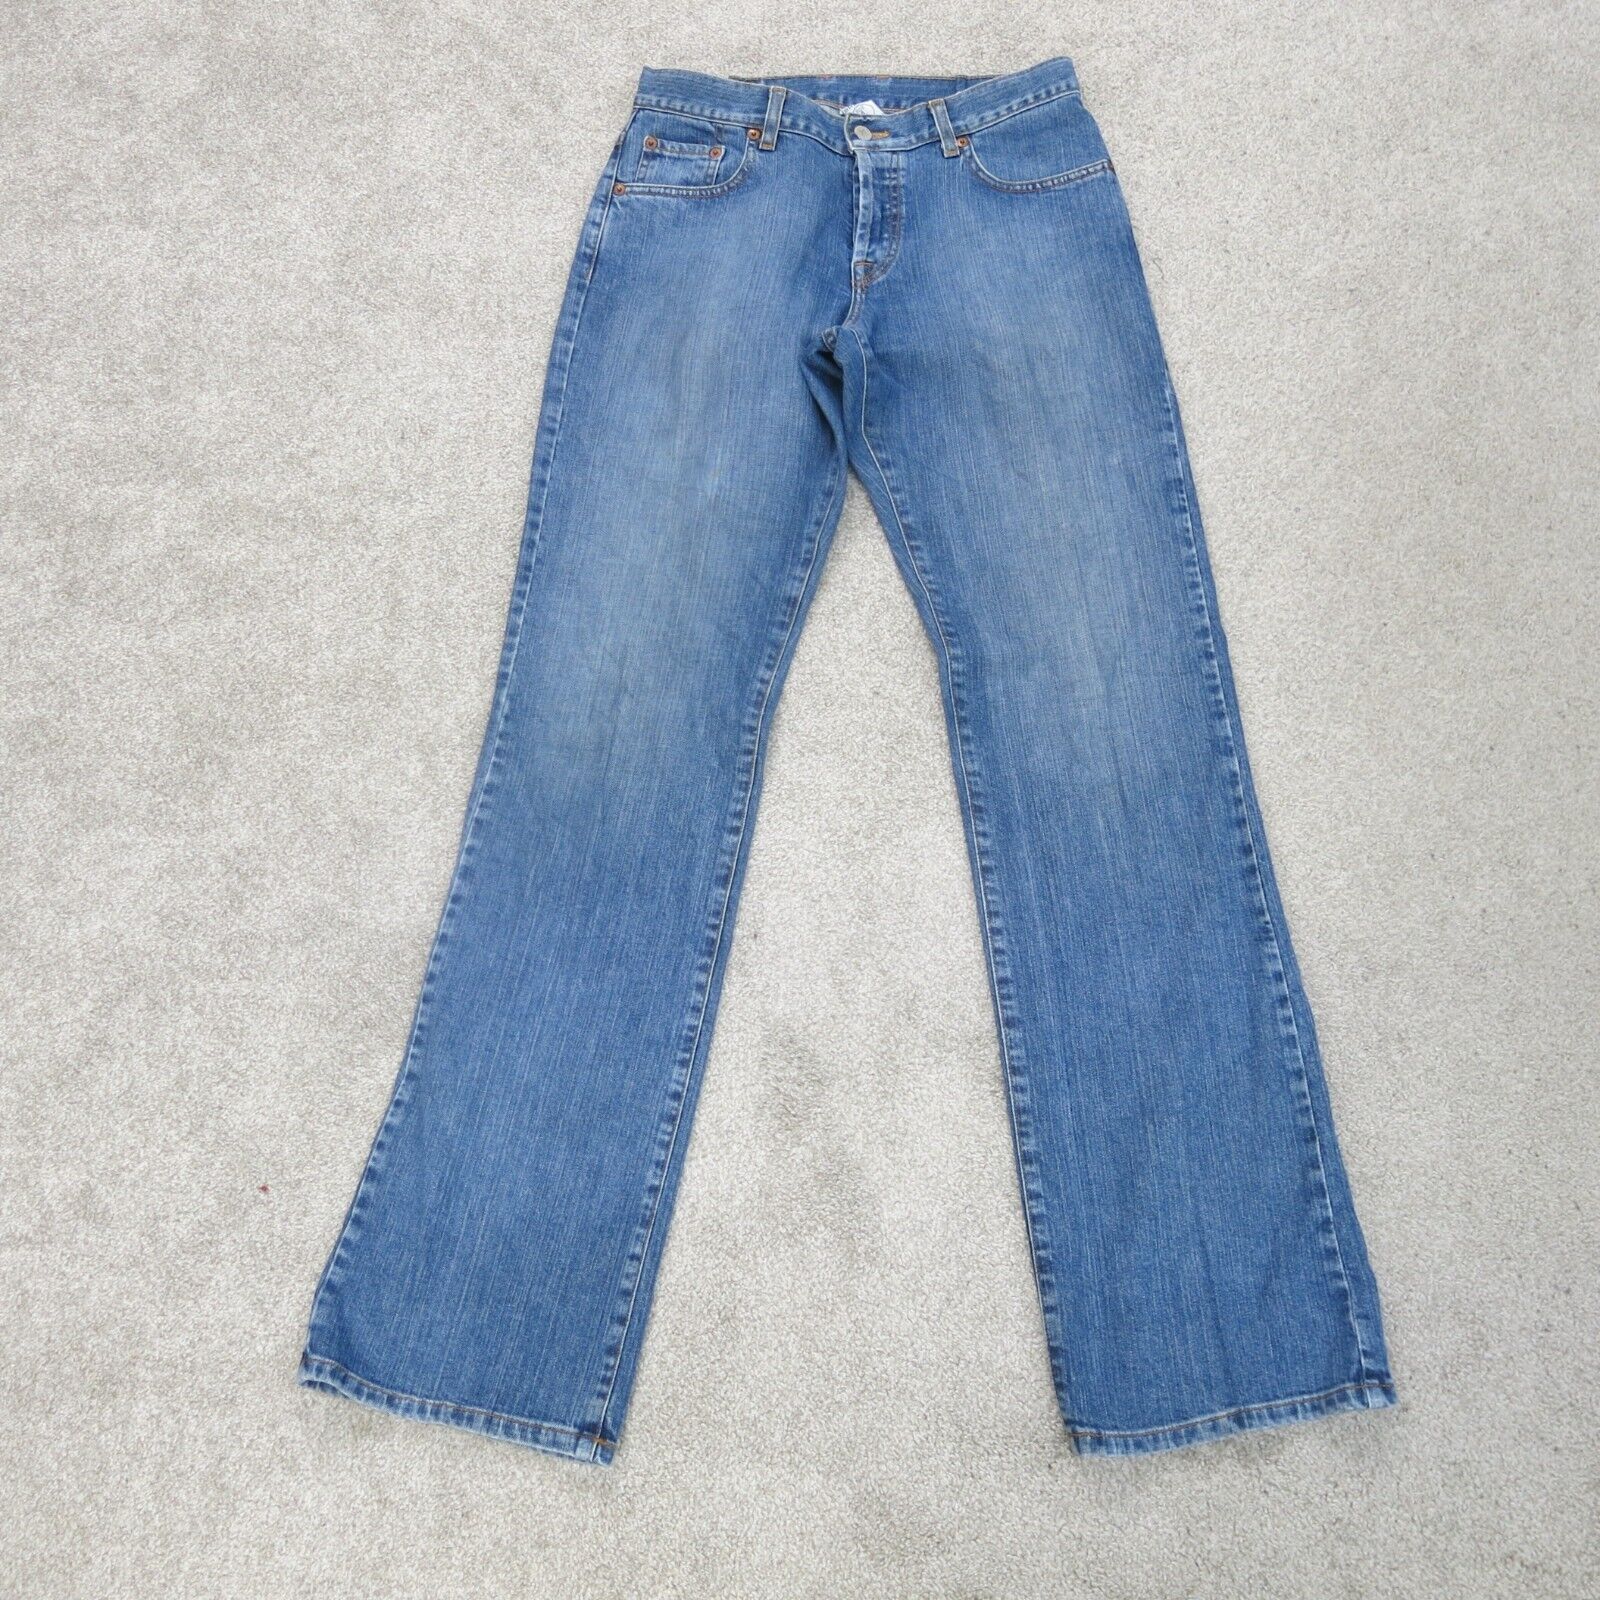 Lucky Brand Regular Size 6 Inseam 28 Jeans for Women for sale